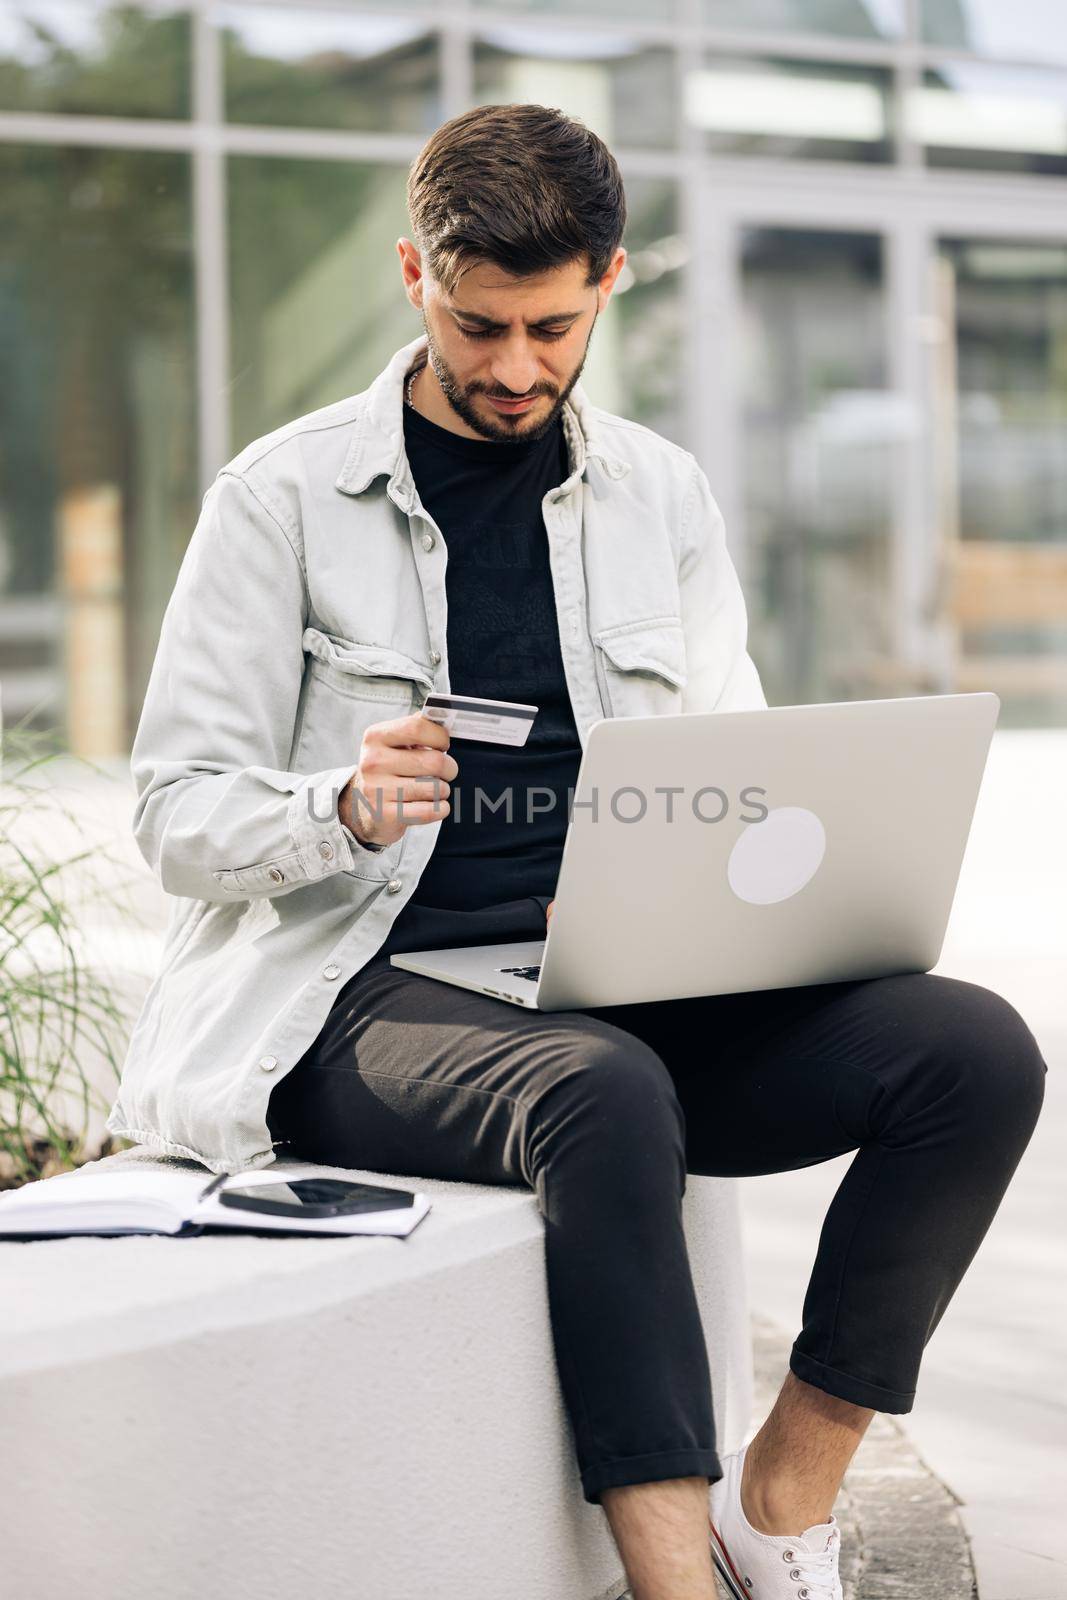 Male buyer paying on website via e commerce service sitting on bench near modern office. Man customer using computer e-banking service making secure online payment holding credit card in hand by uflypro